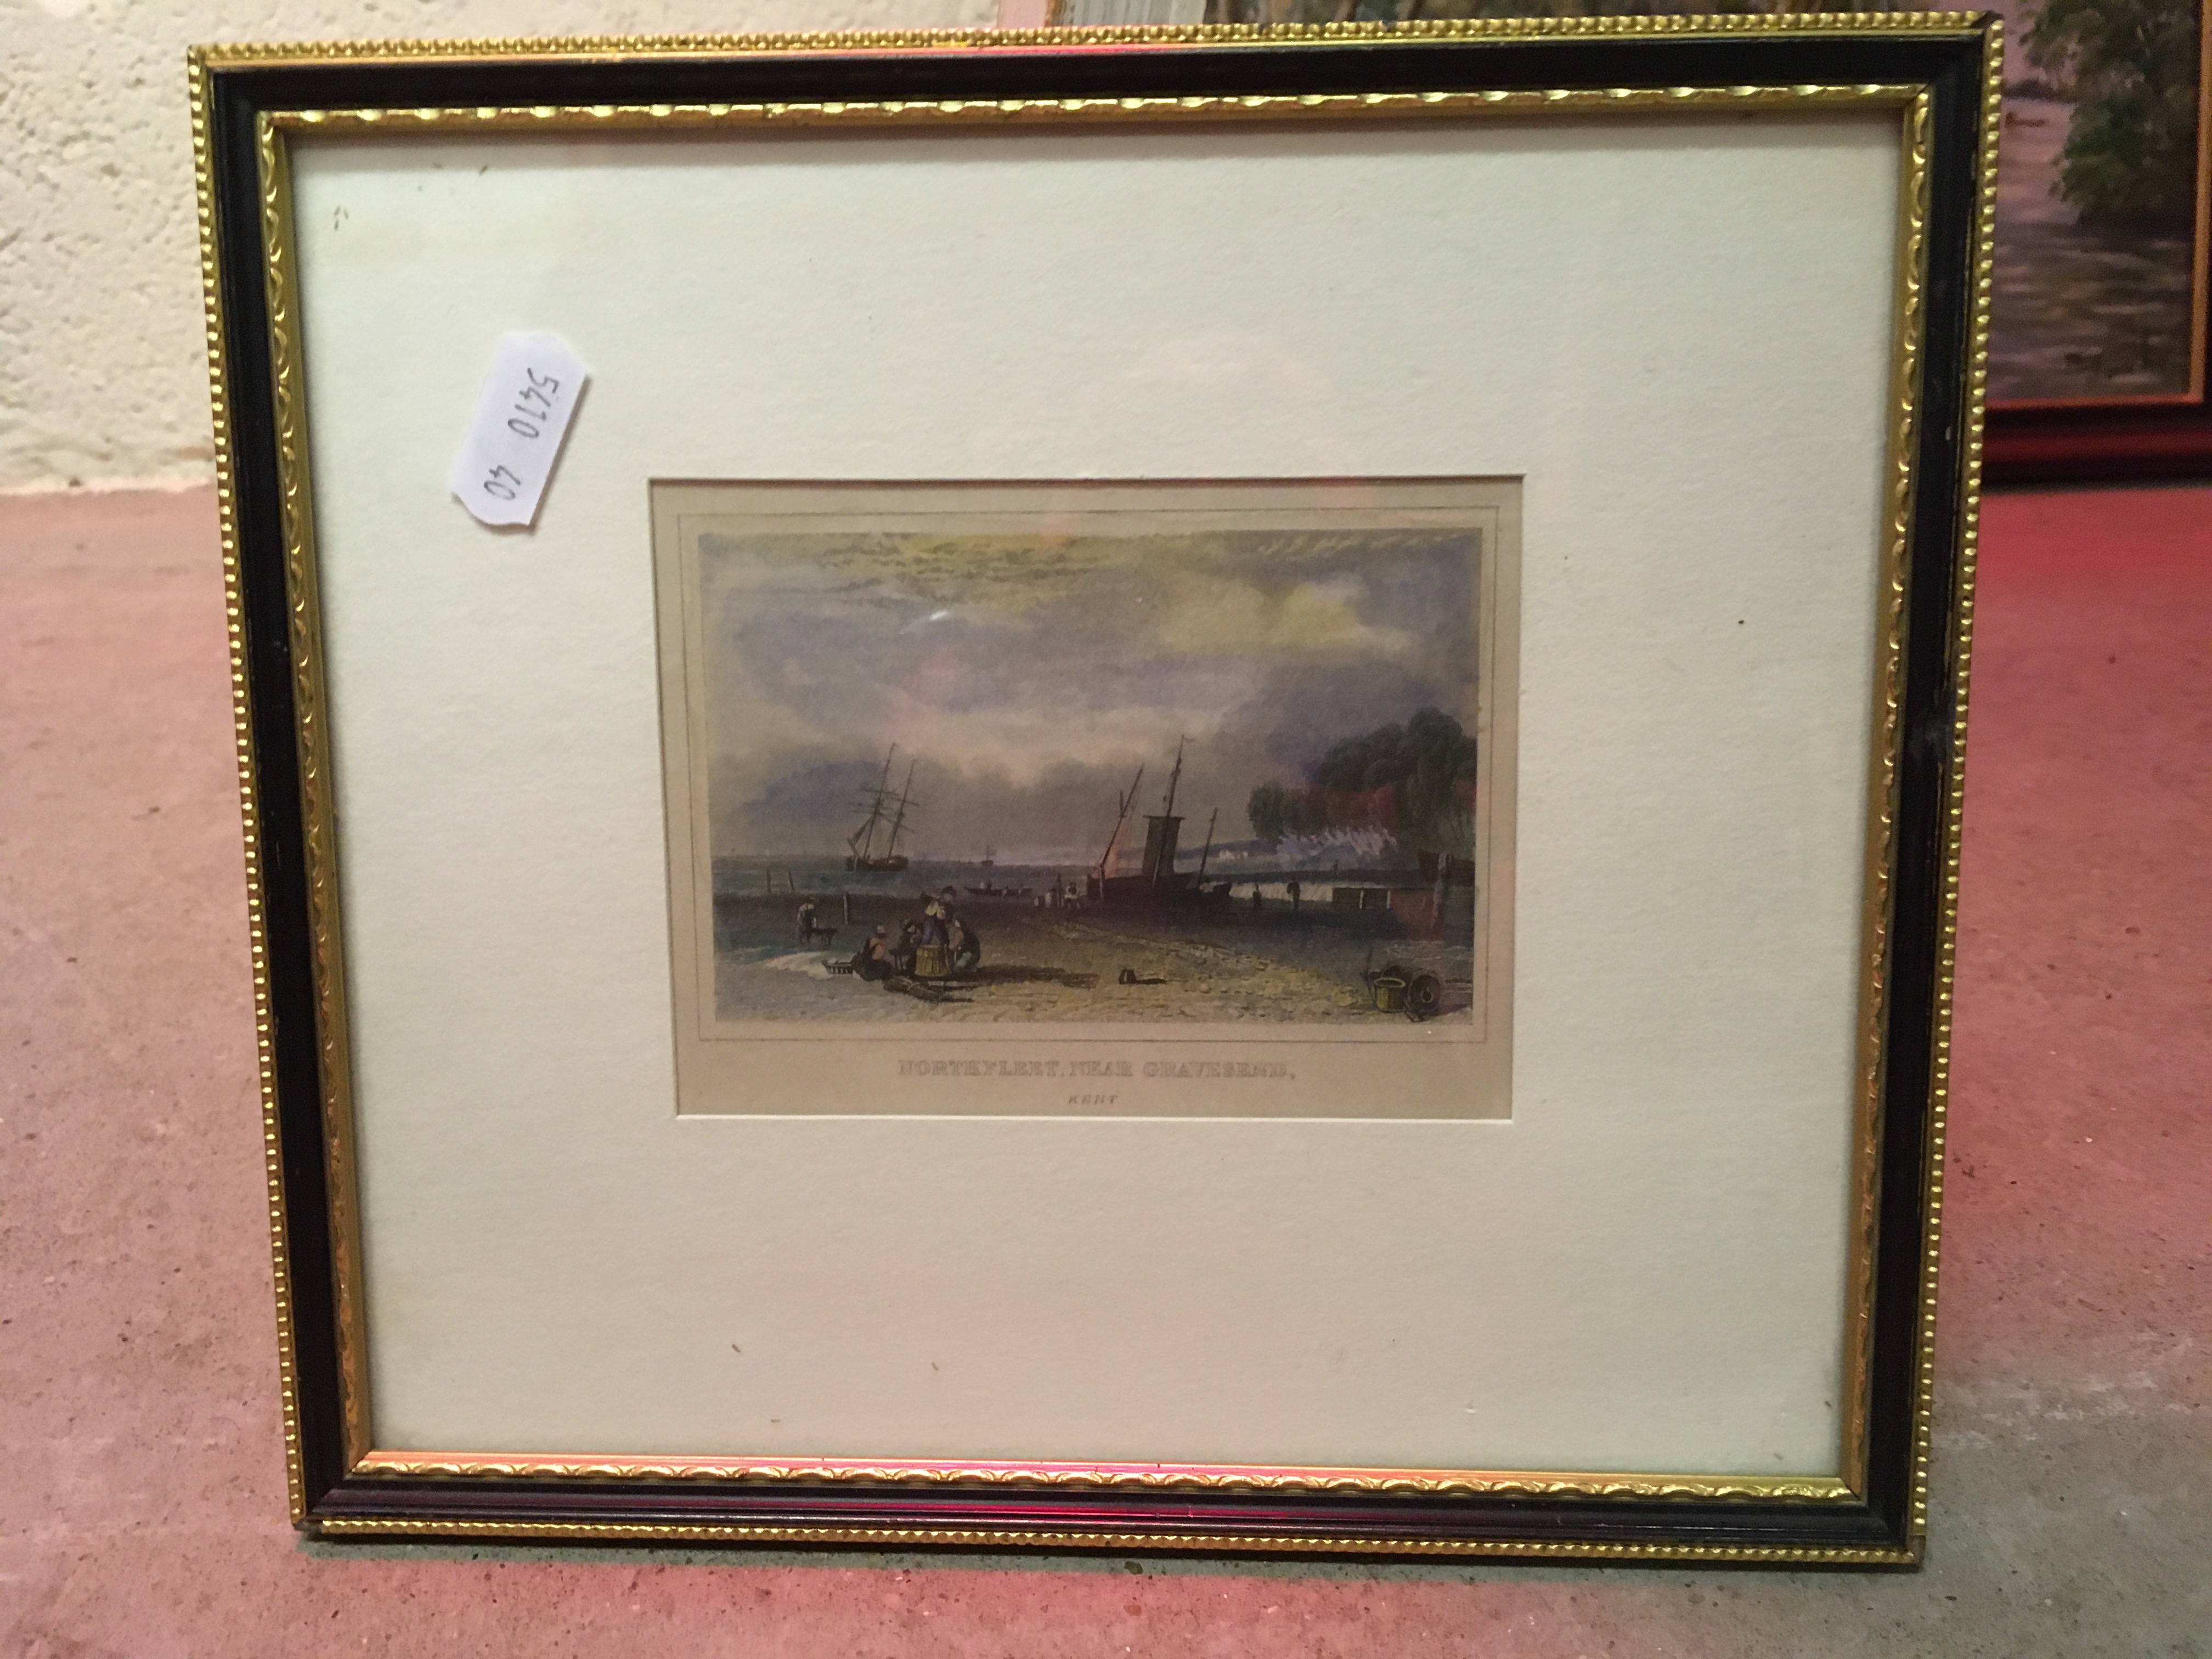 J A TOFT "River scene with bridge in background, - Image 21 of 31